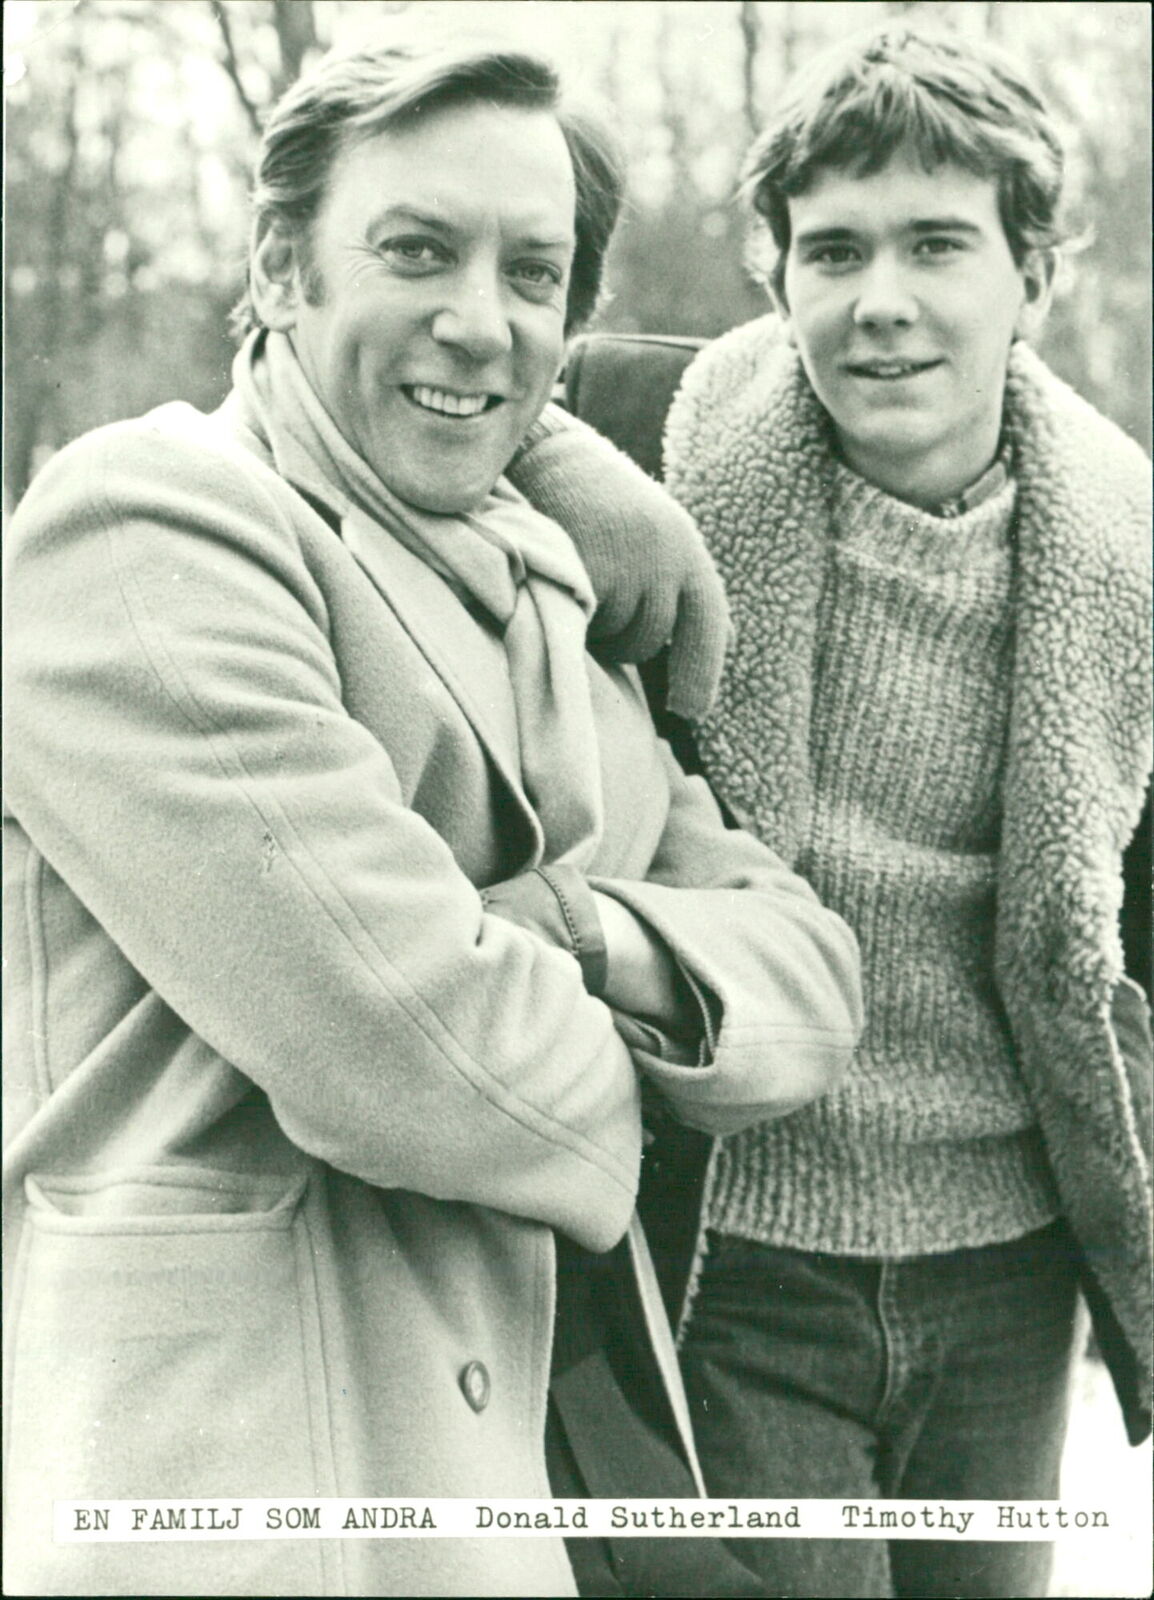 Donald Sutherland and Timothy Hutton - Vintage Photograph 2426253